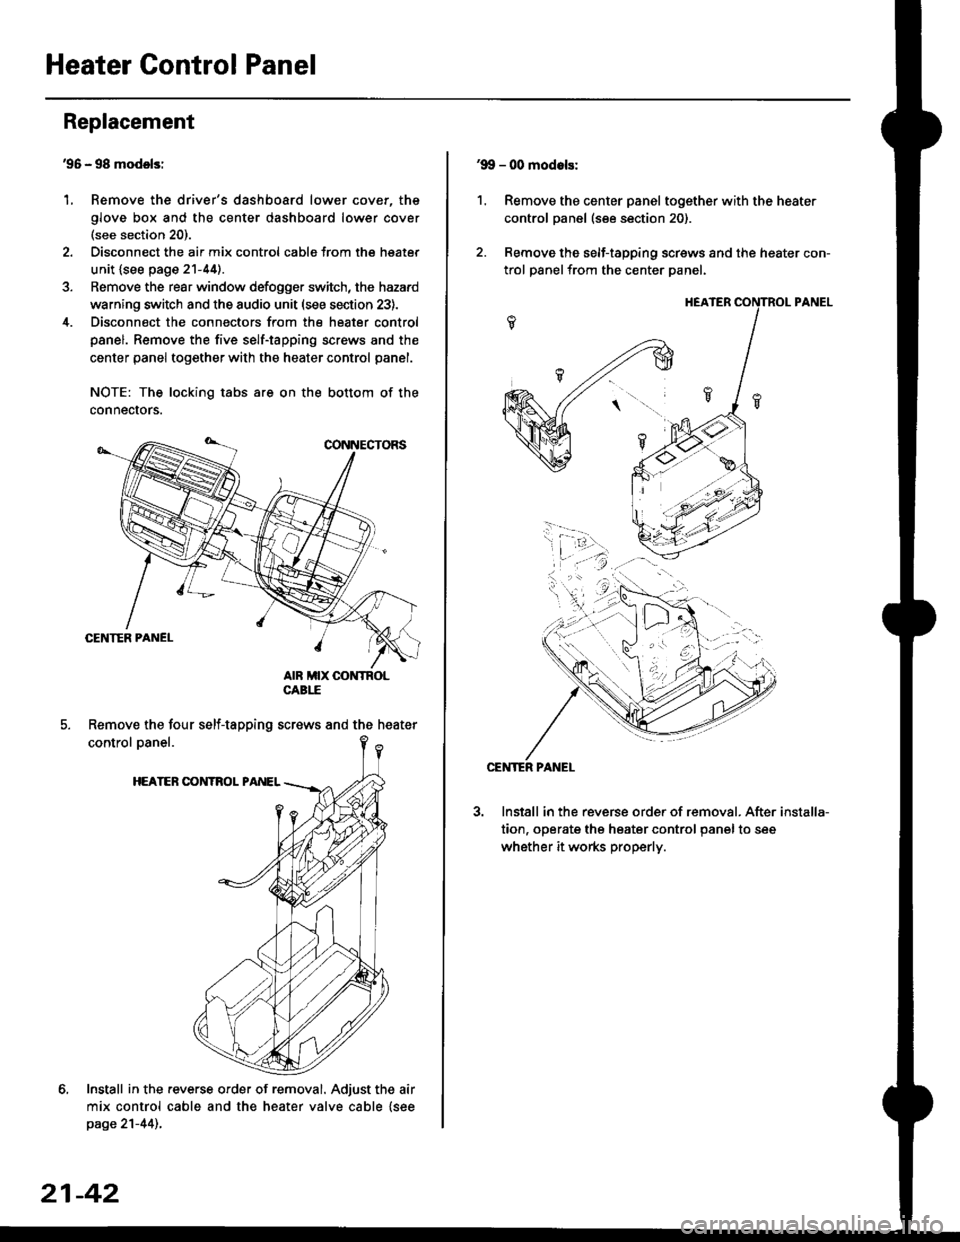 HONDA CIVIC 1996 6.G Workshop Manual Heater Control Panel
95 - 98 modolsi
Remove the drivers dashboard lower cover, the
glove box and the center dashboard lower cover(see section 20).
Disconnect the air mix control cabls from the heate